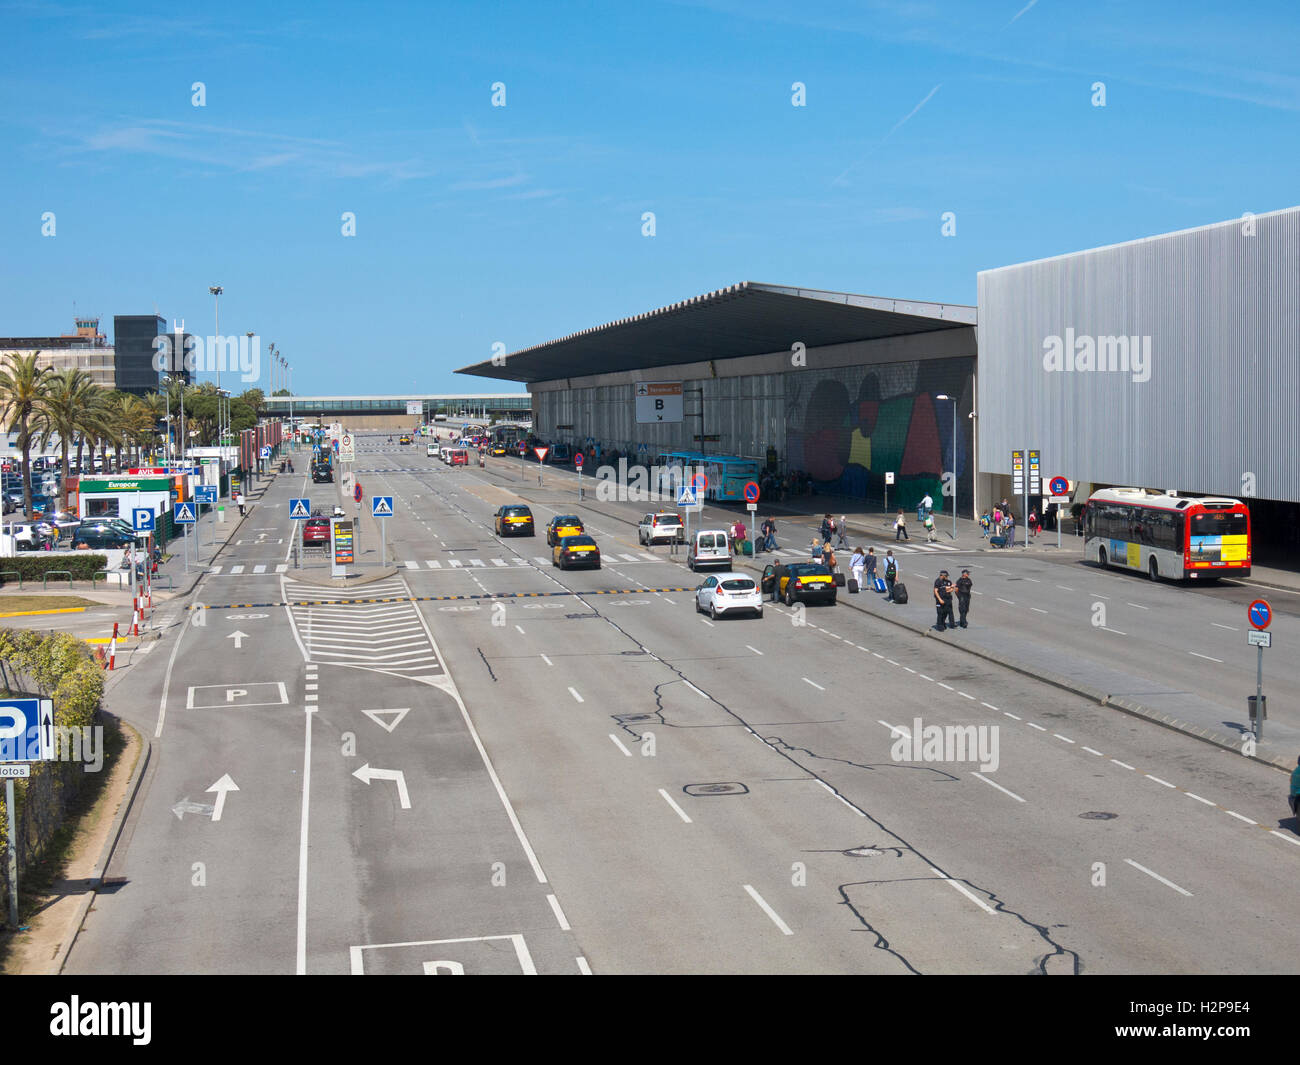 Barcelona Airport Exterior High Resolution Stock Photography and Images -  Alamy